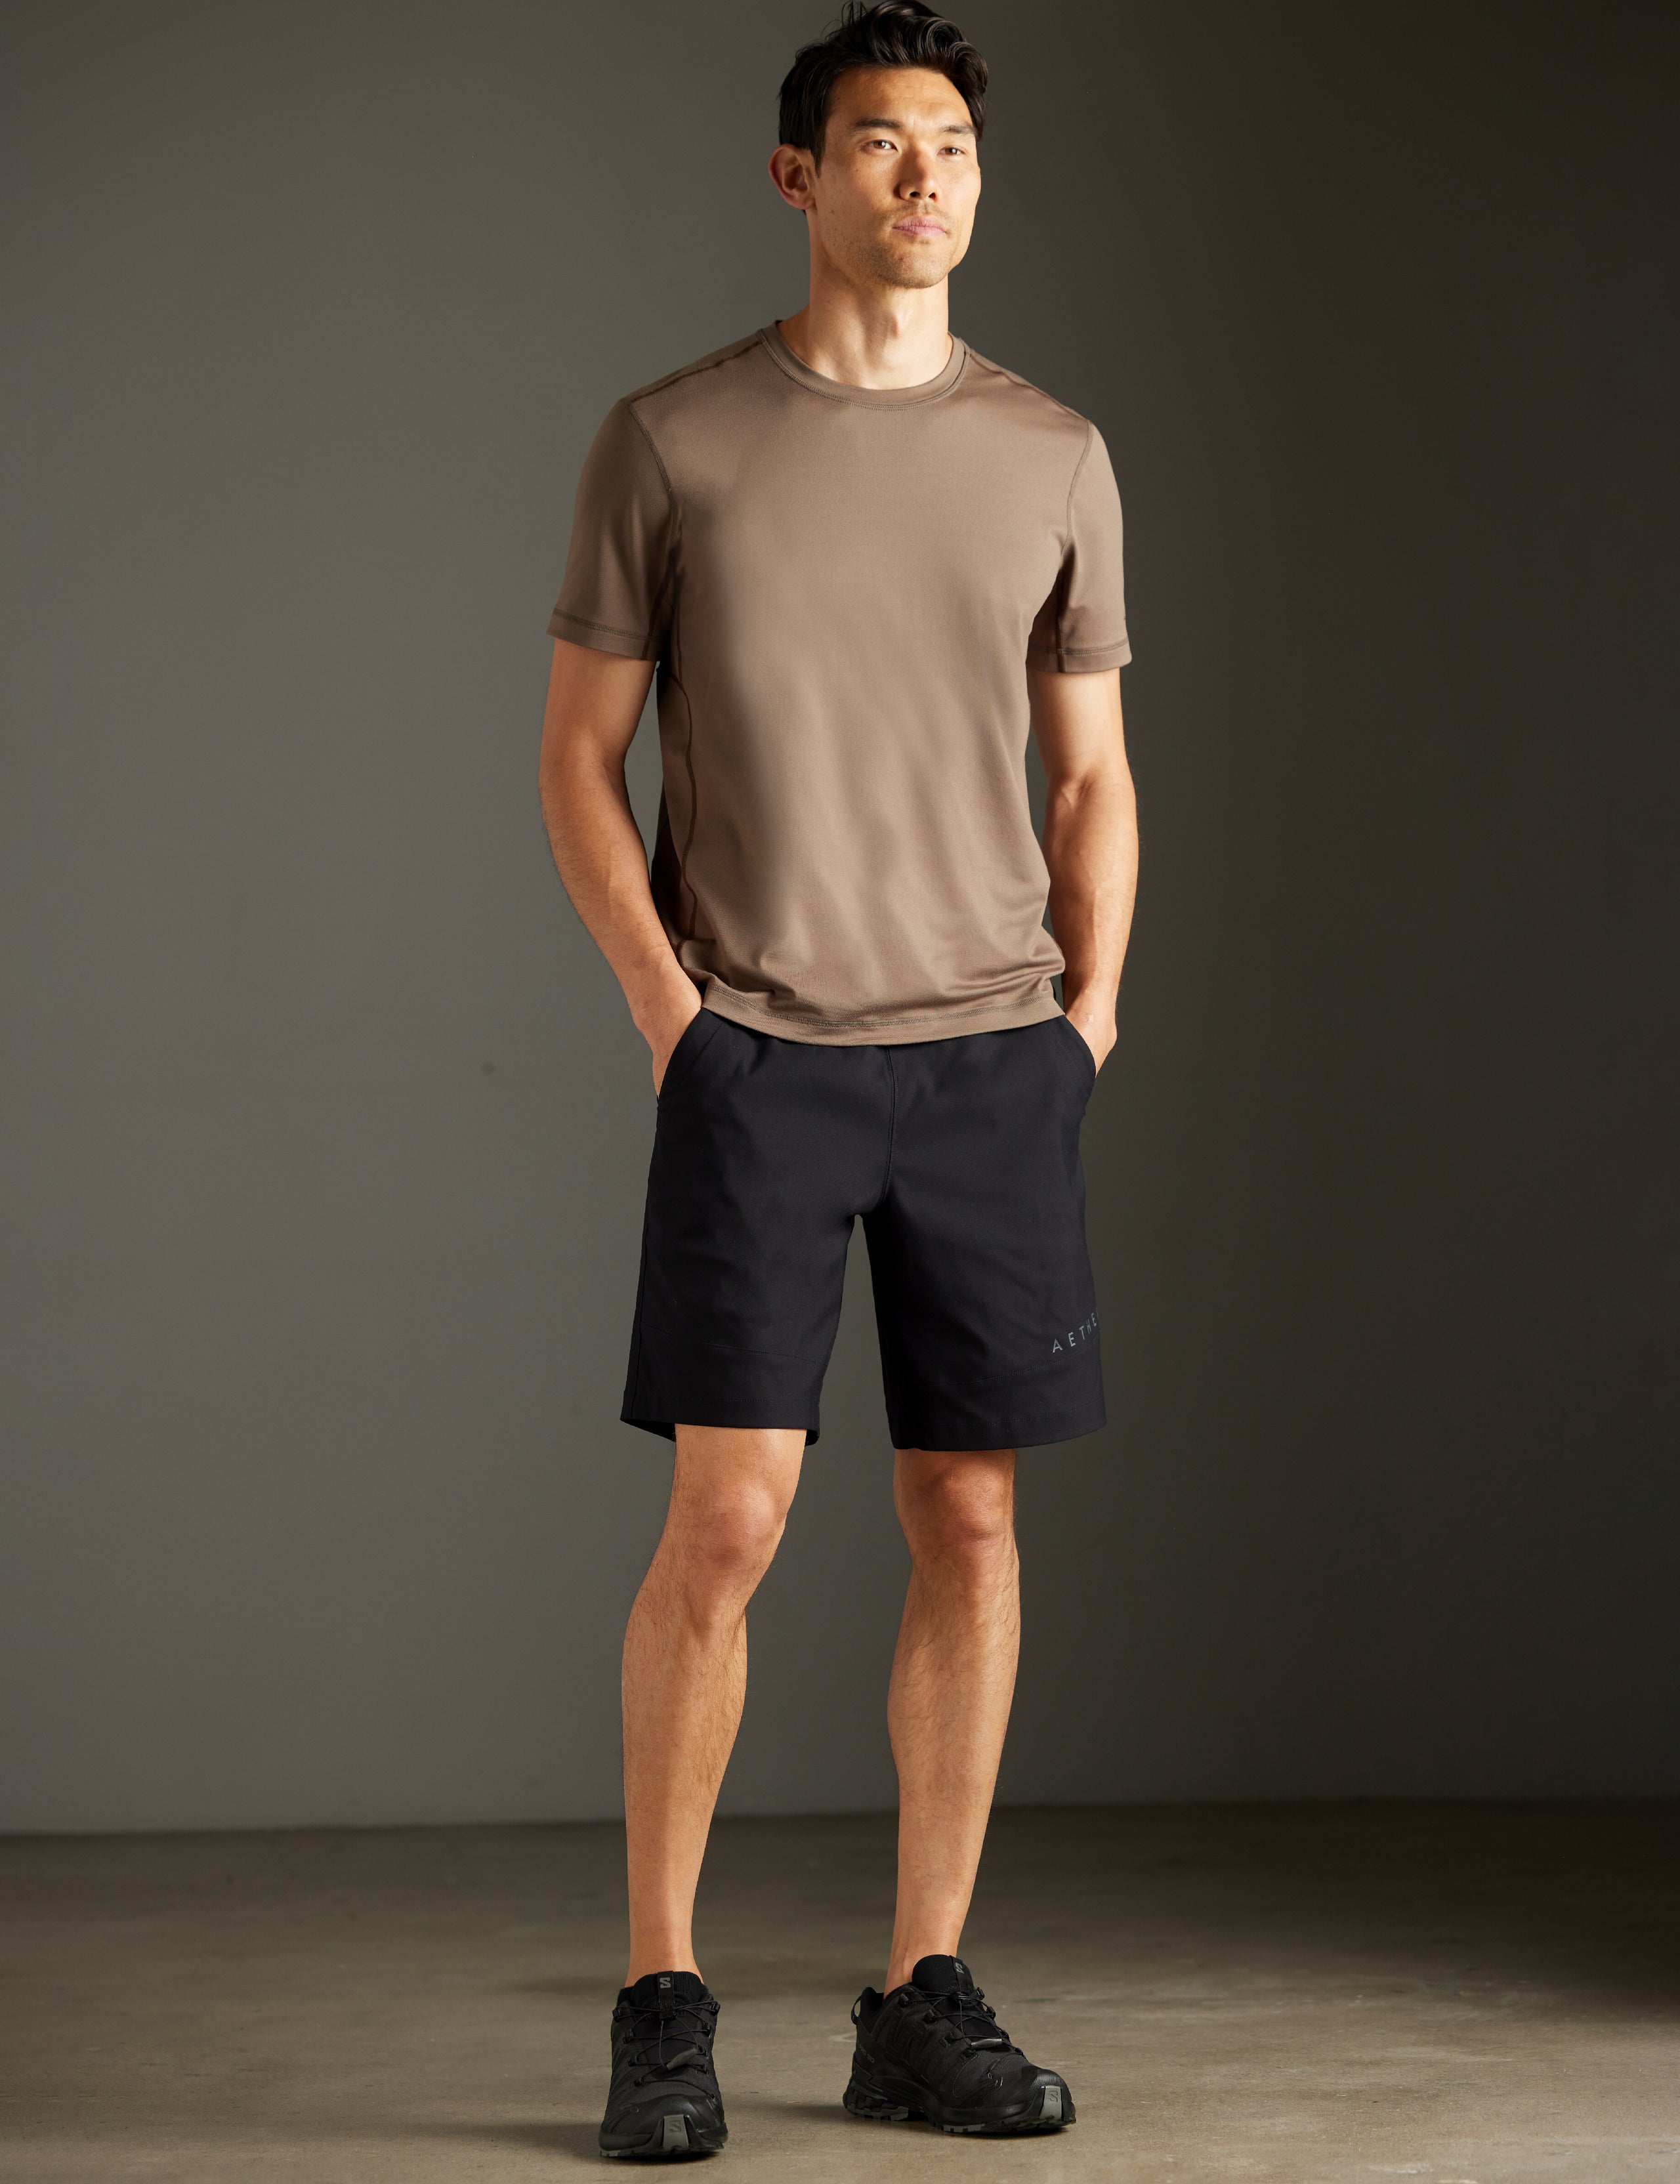 men wearing black shorts from AETHER Apparel